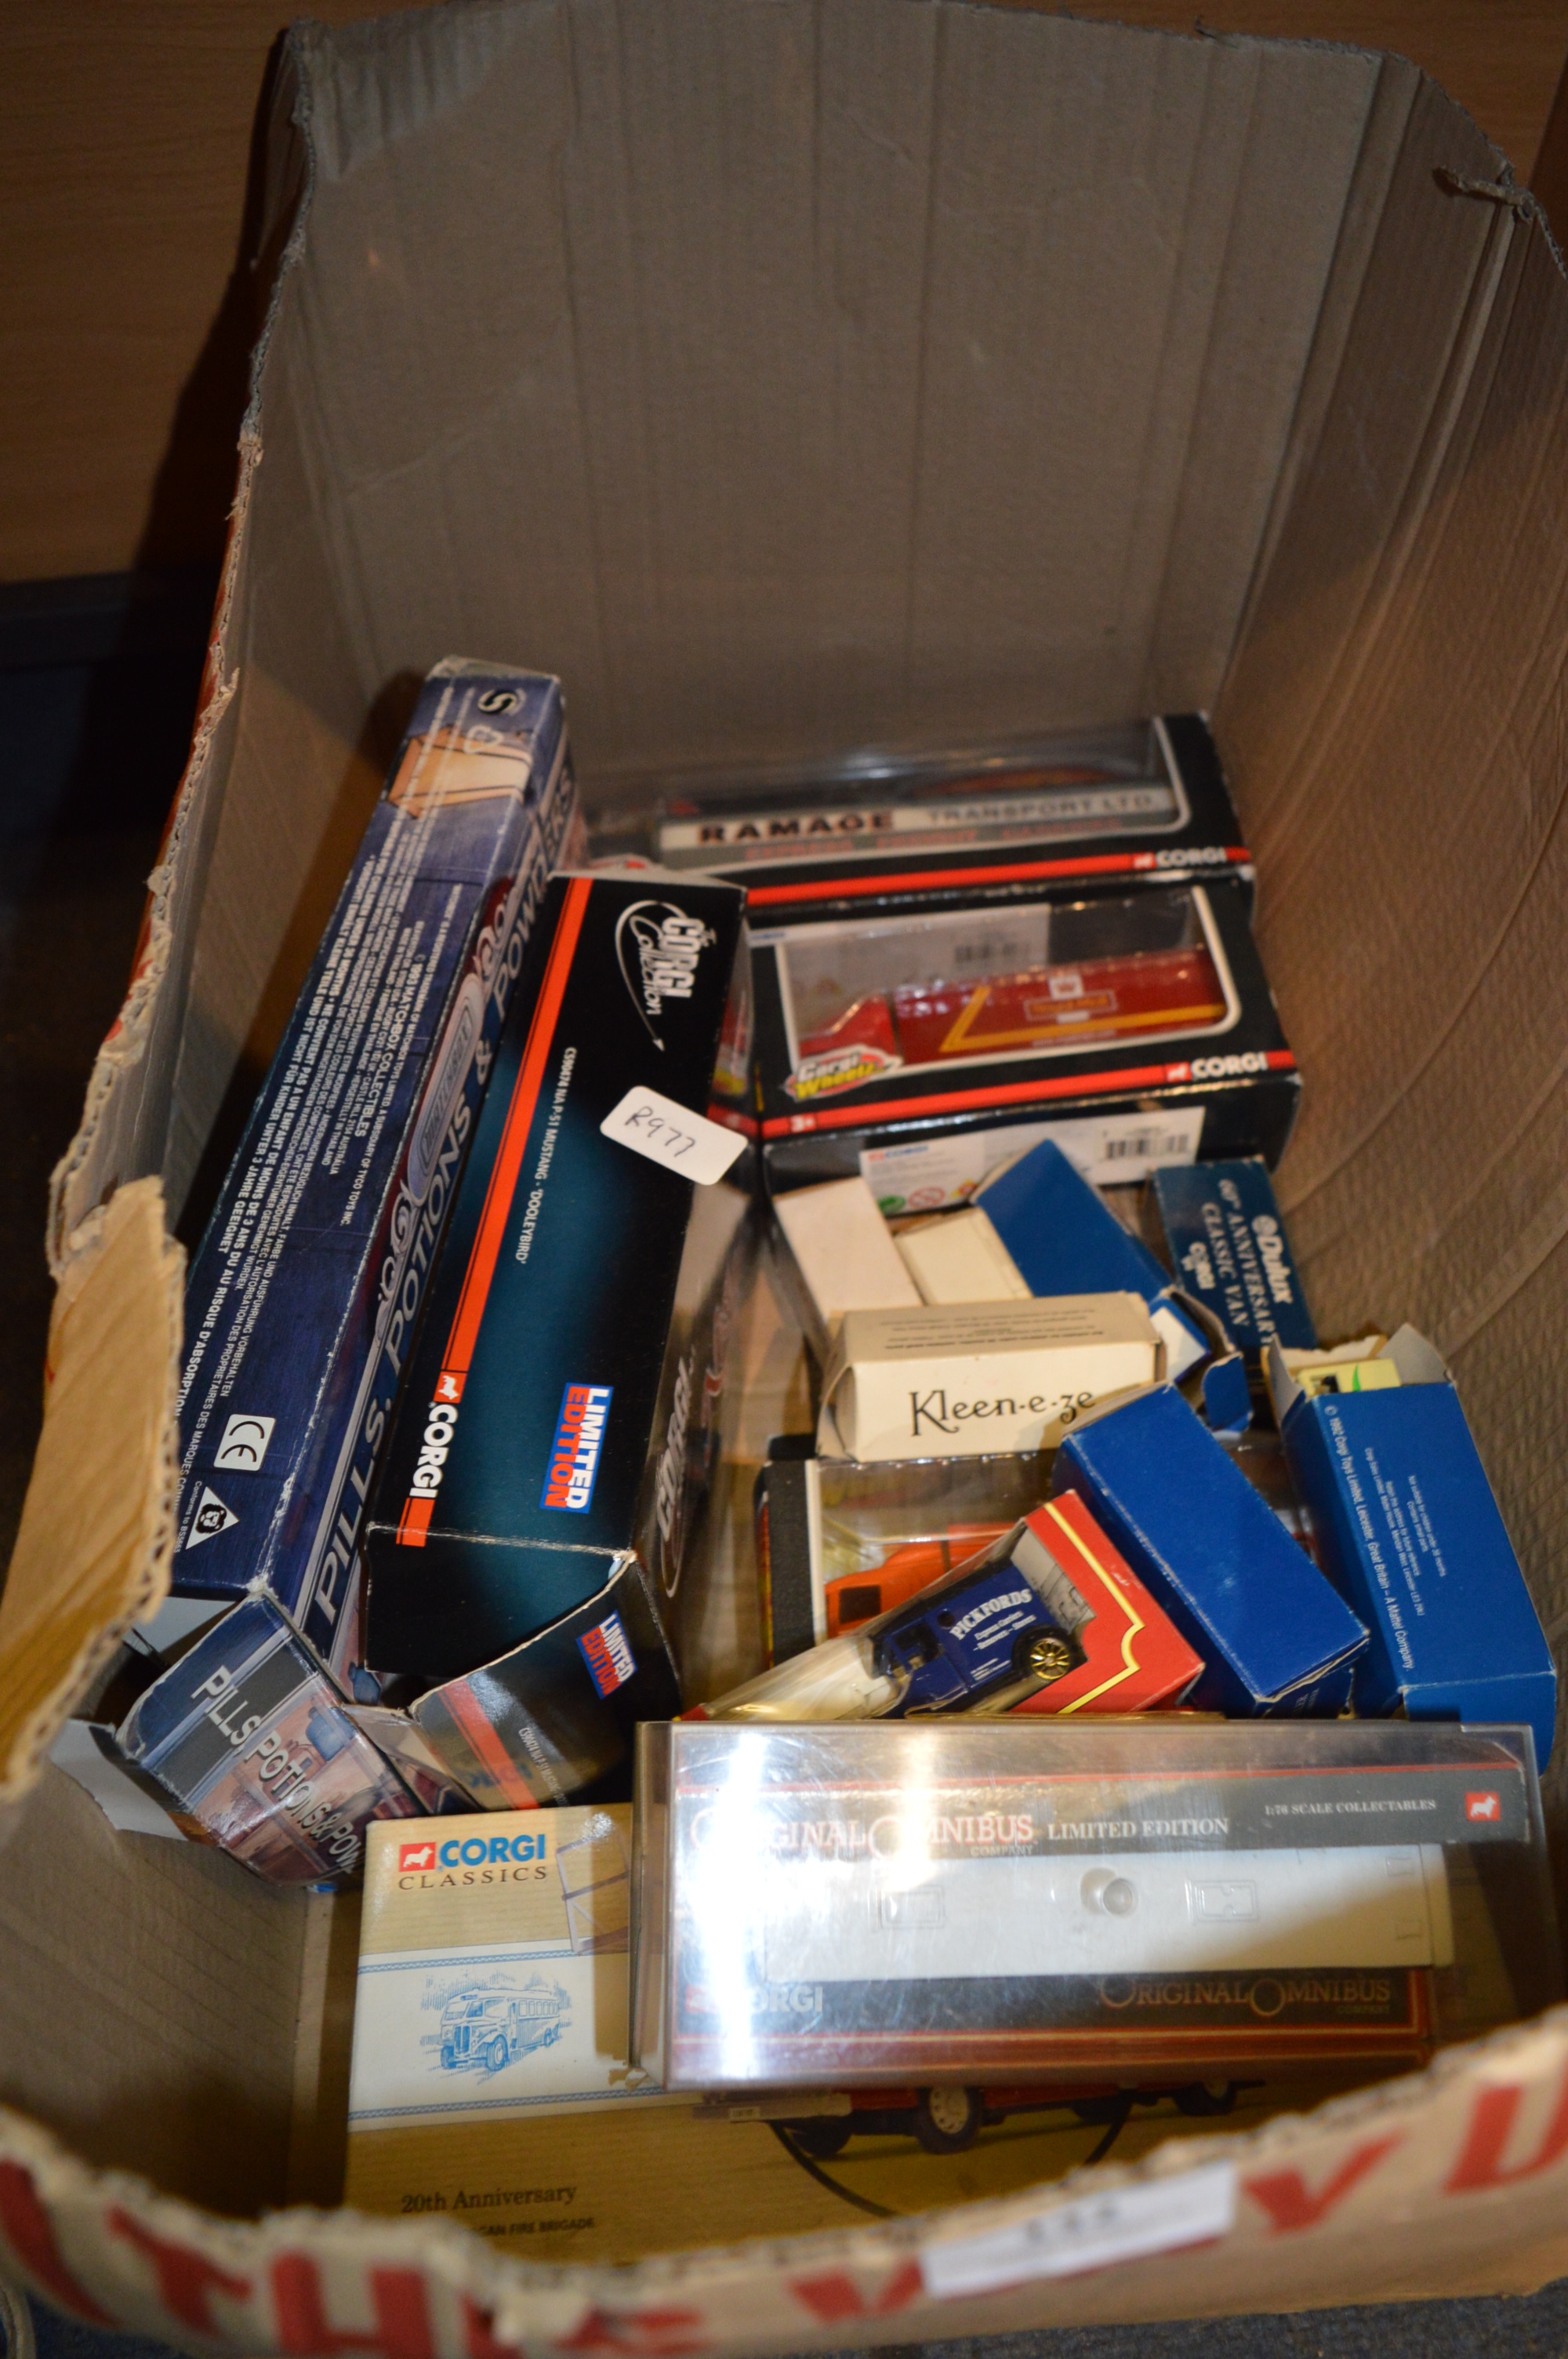 Box containing Assorted Boxed Diecast Vehicles